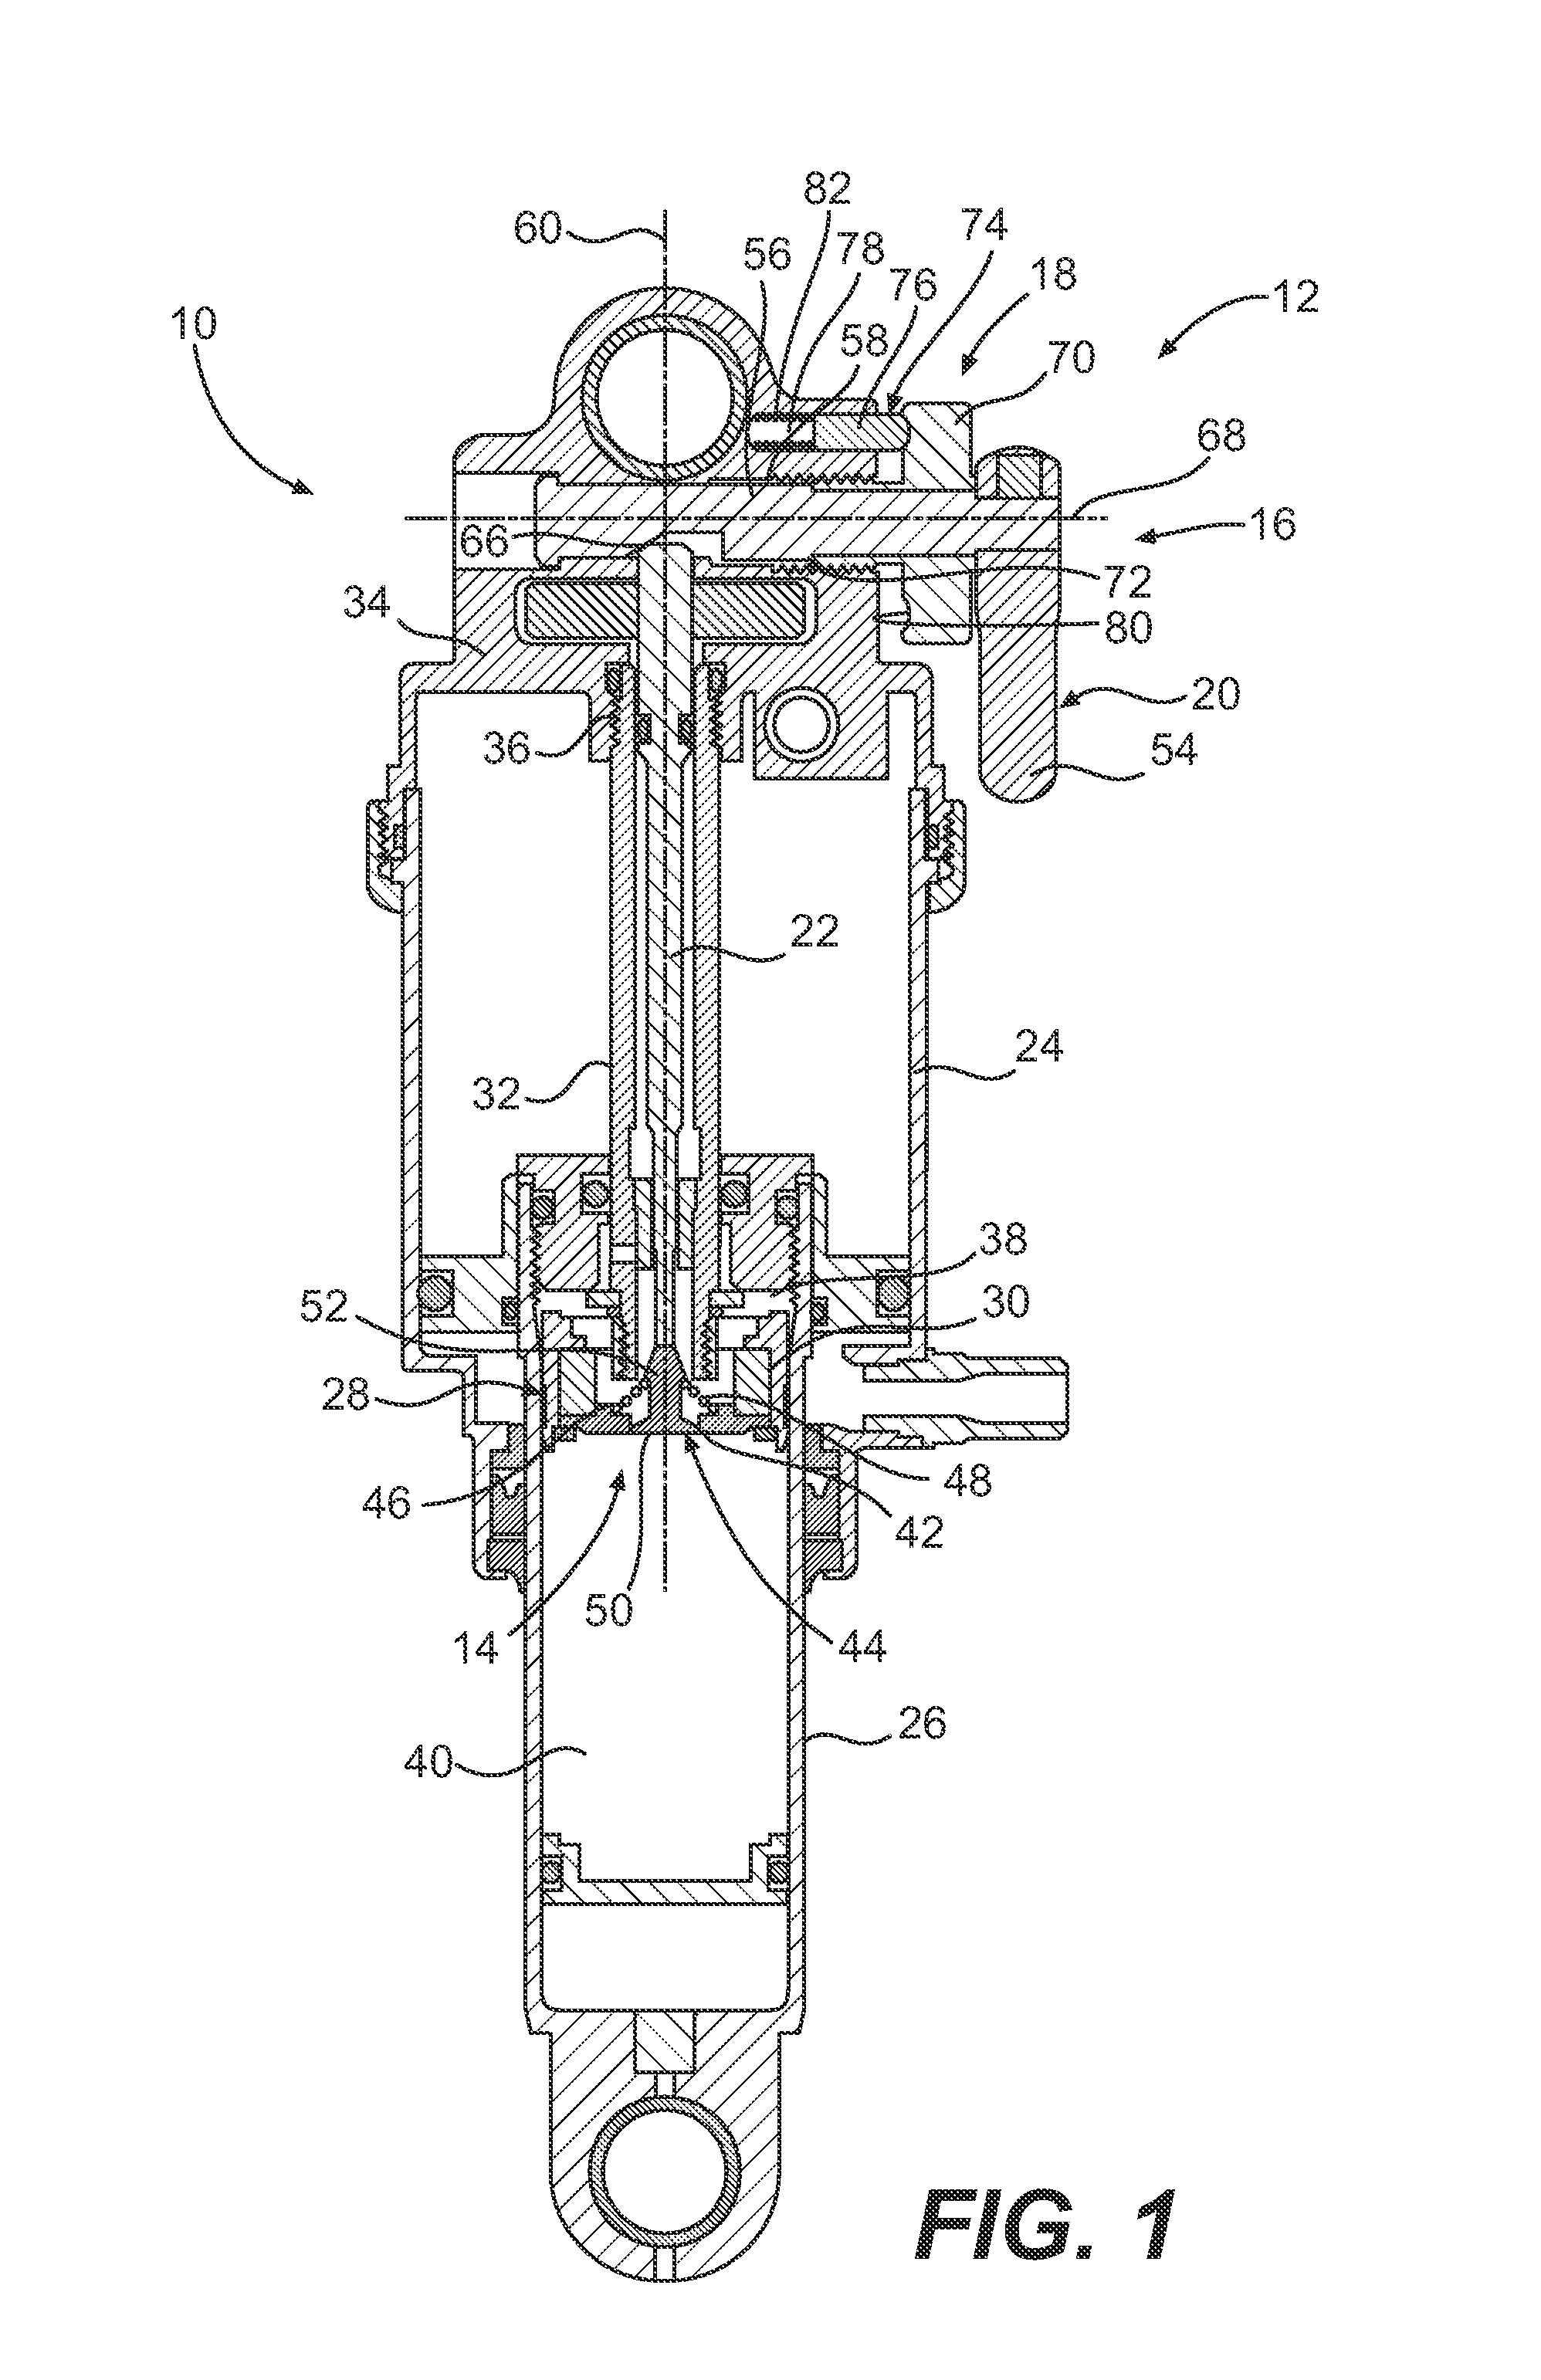 Actuator apparatus for controlling a valve mechanism of a suspension system